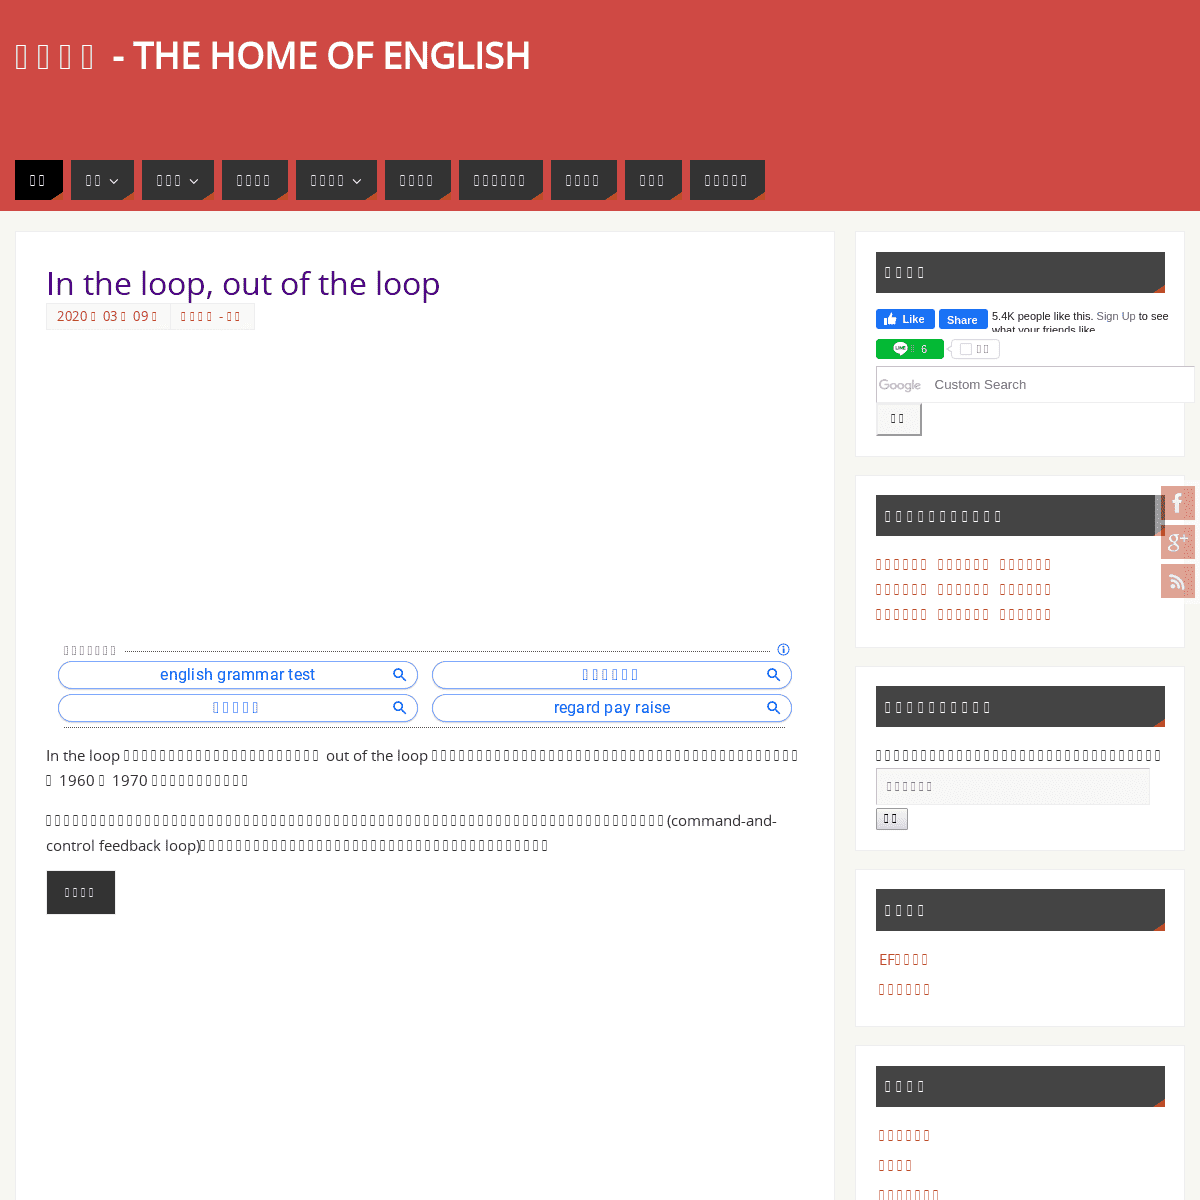 A complete backup of englishhome.org